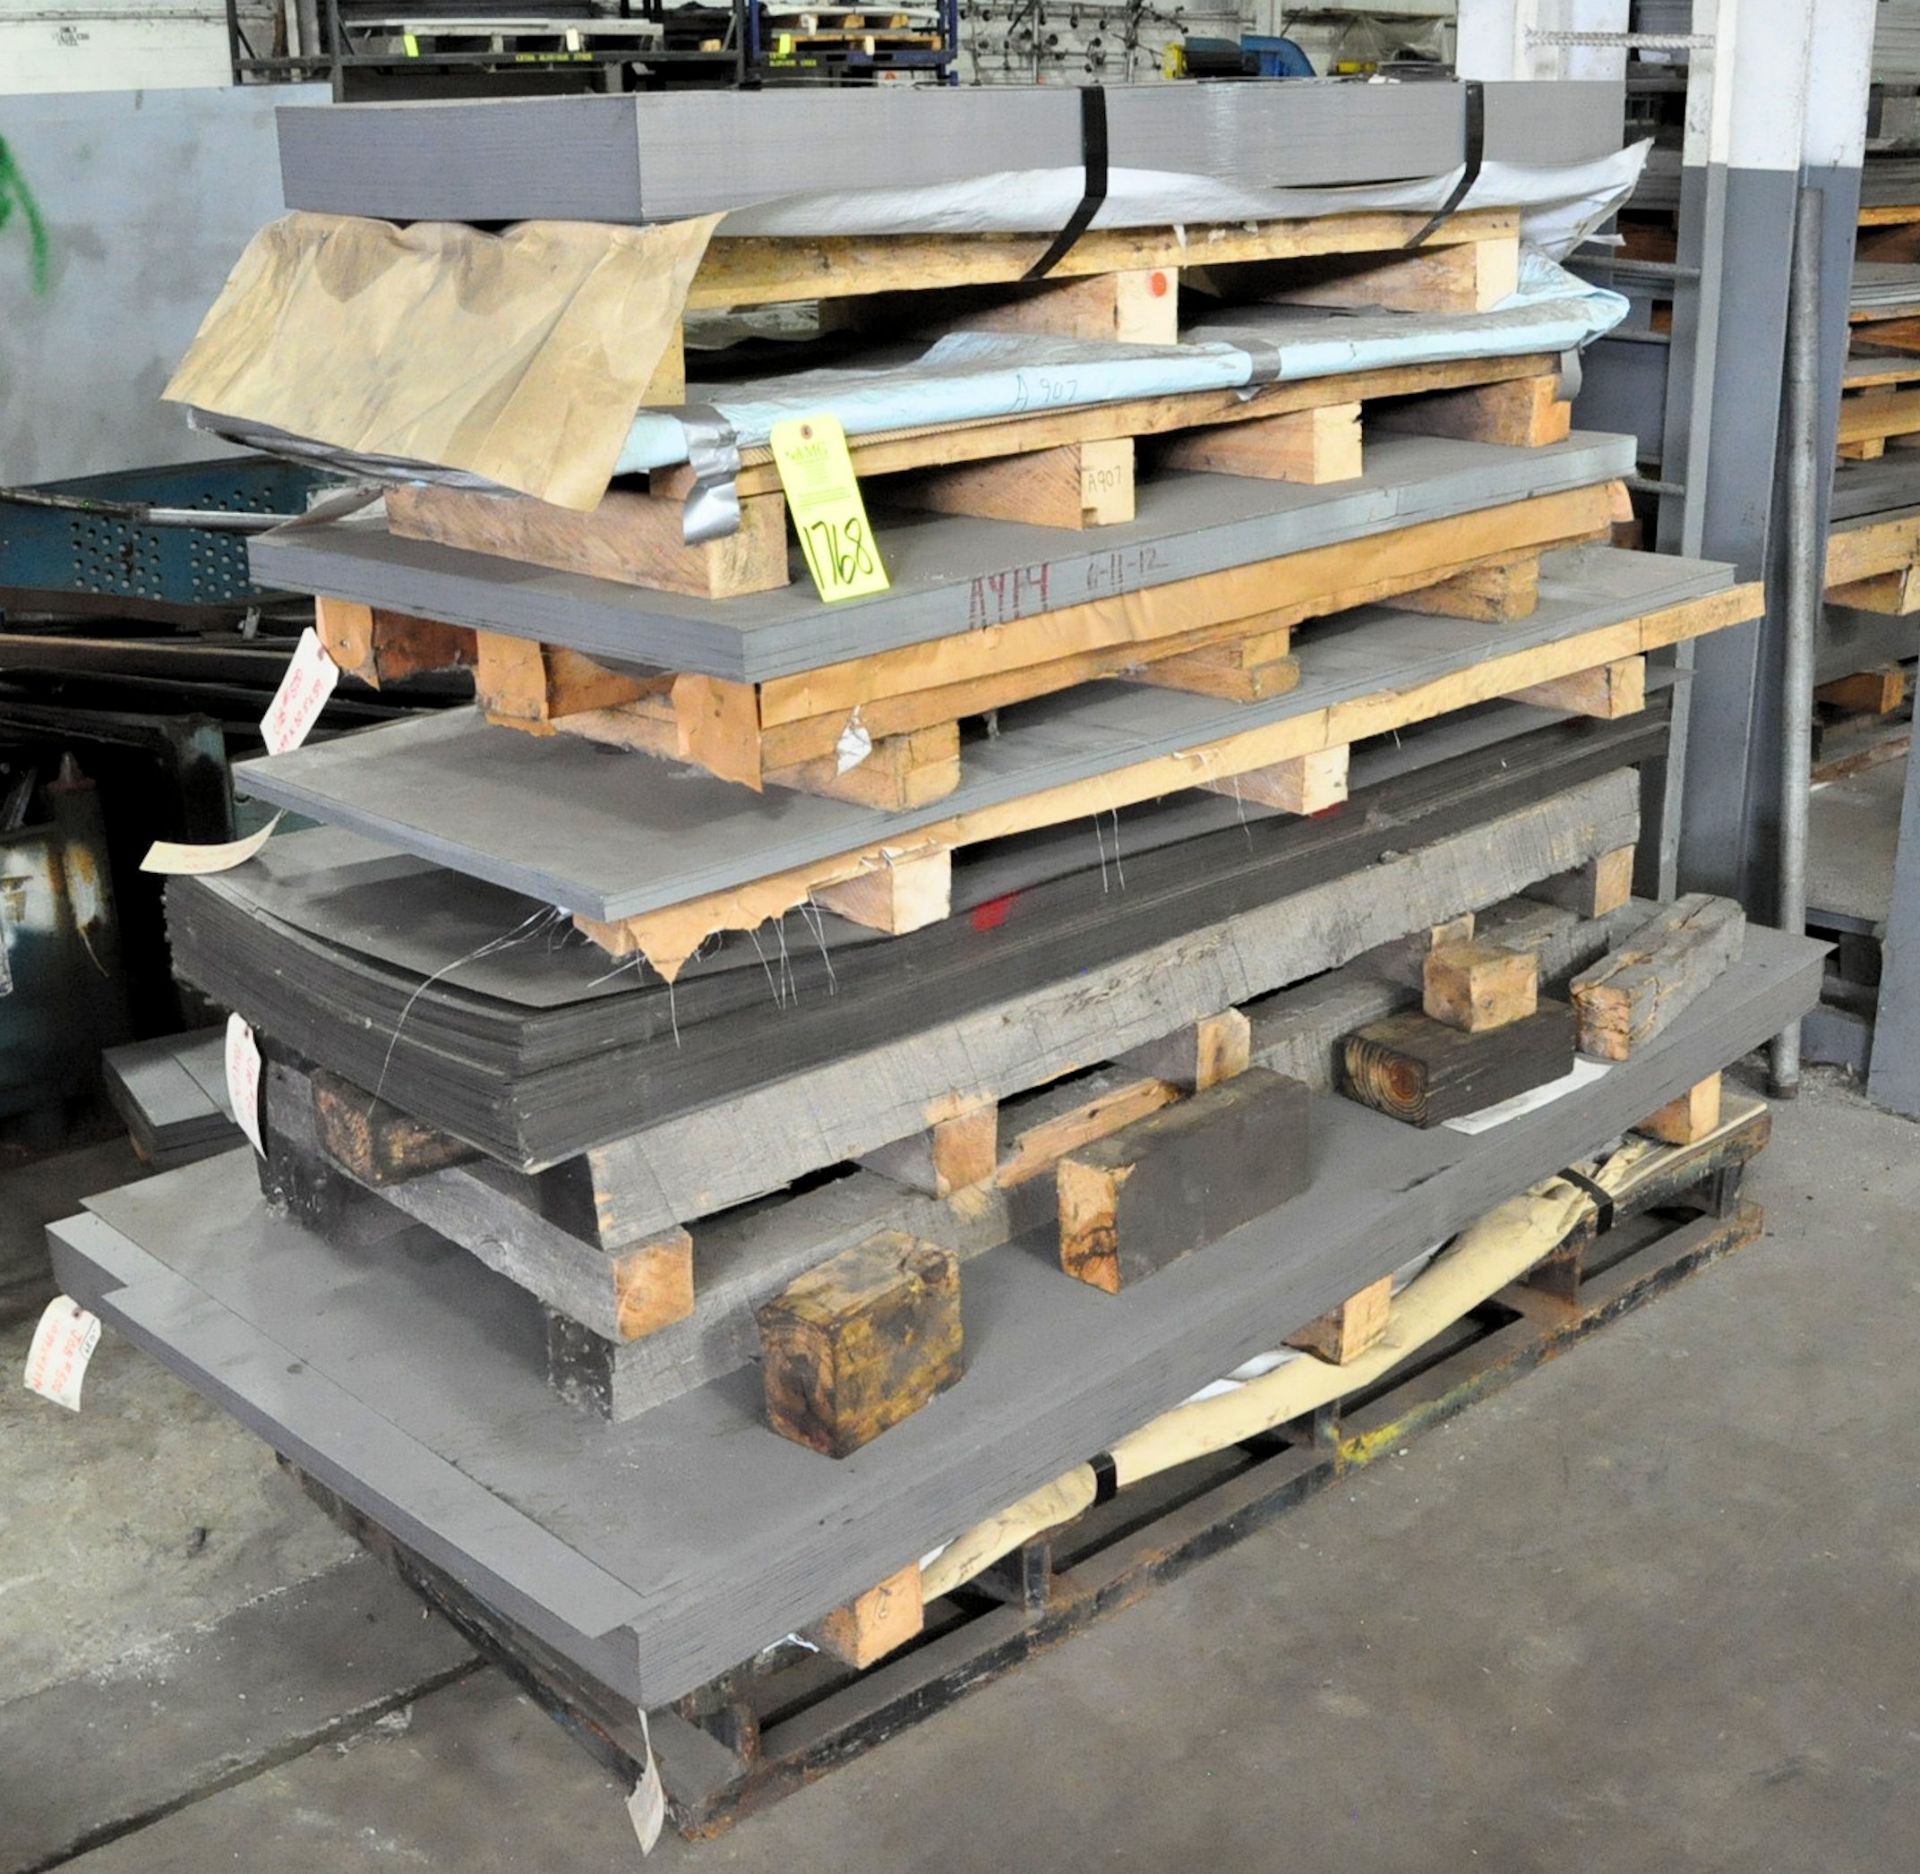 Lot-Misc. Sheet Metal Stock Cutoffs on (7) Small Pallets in (1) Stack, (Warehouse Room), (Yellow